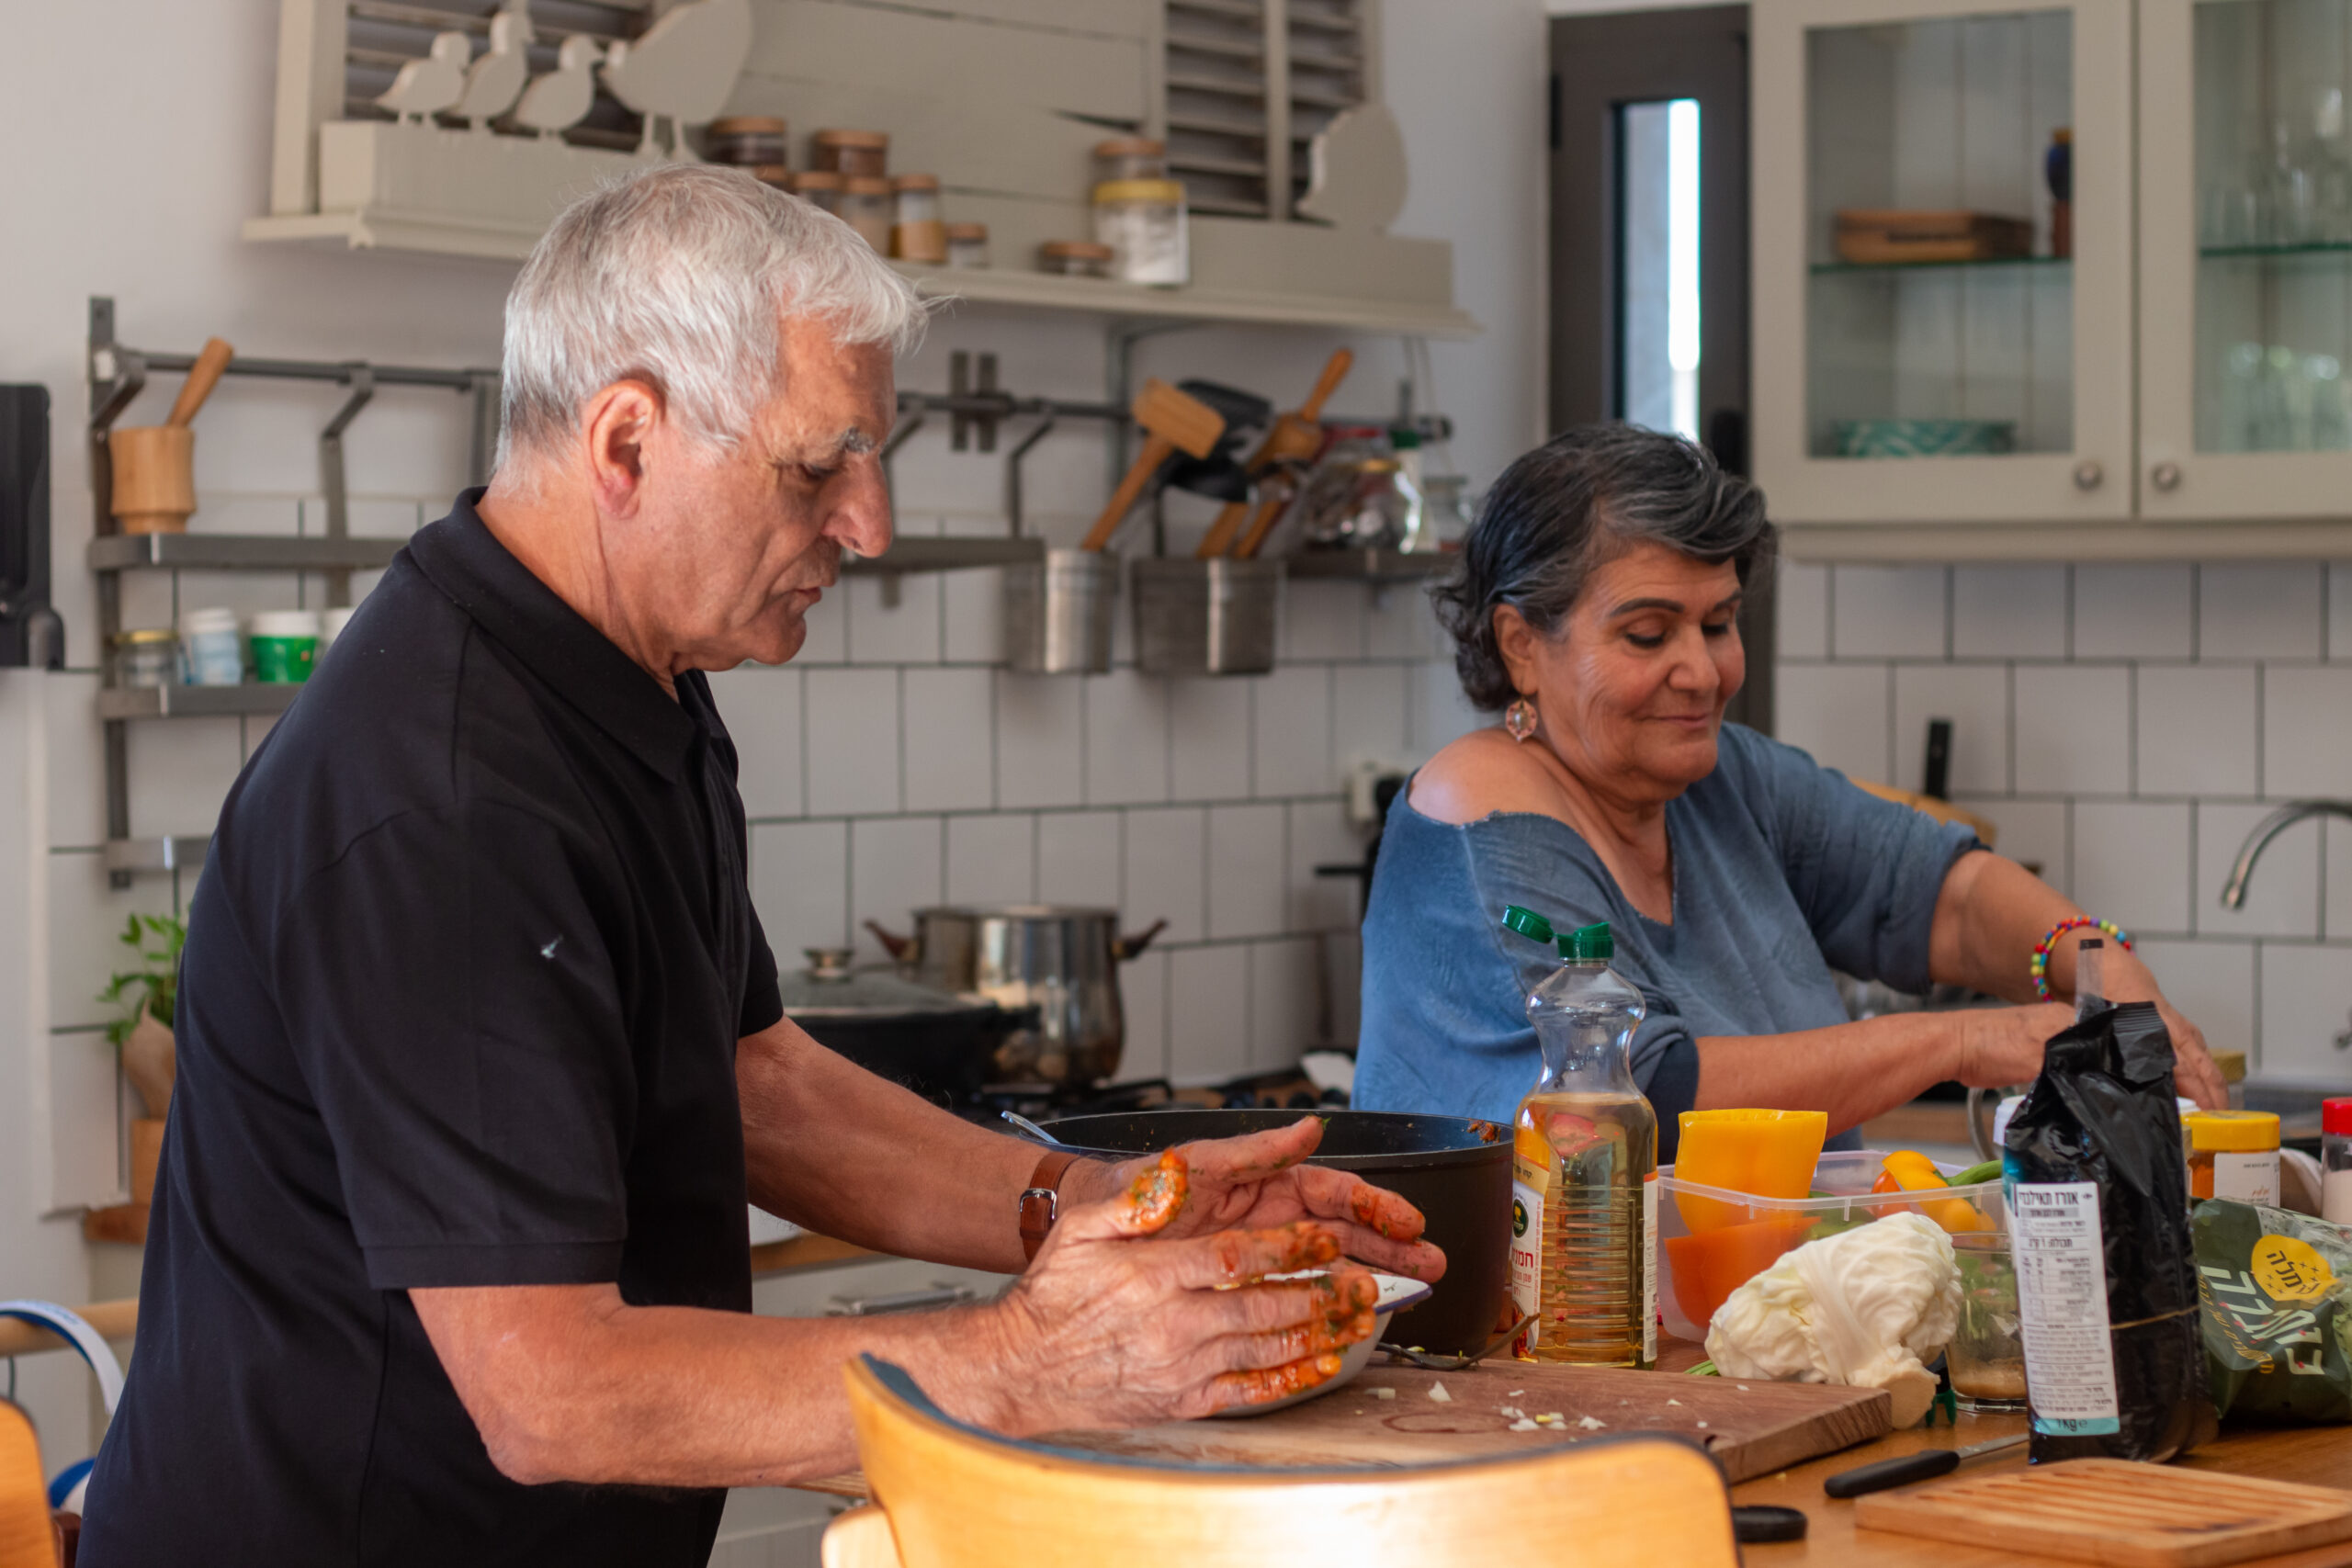 Tami and Moris Moyal cook at The Open Kitchen Project